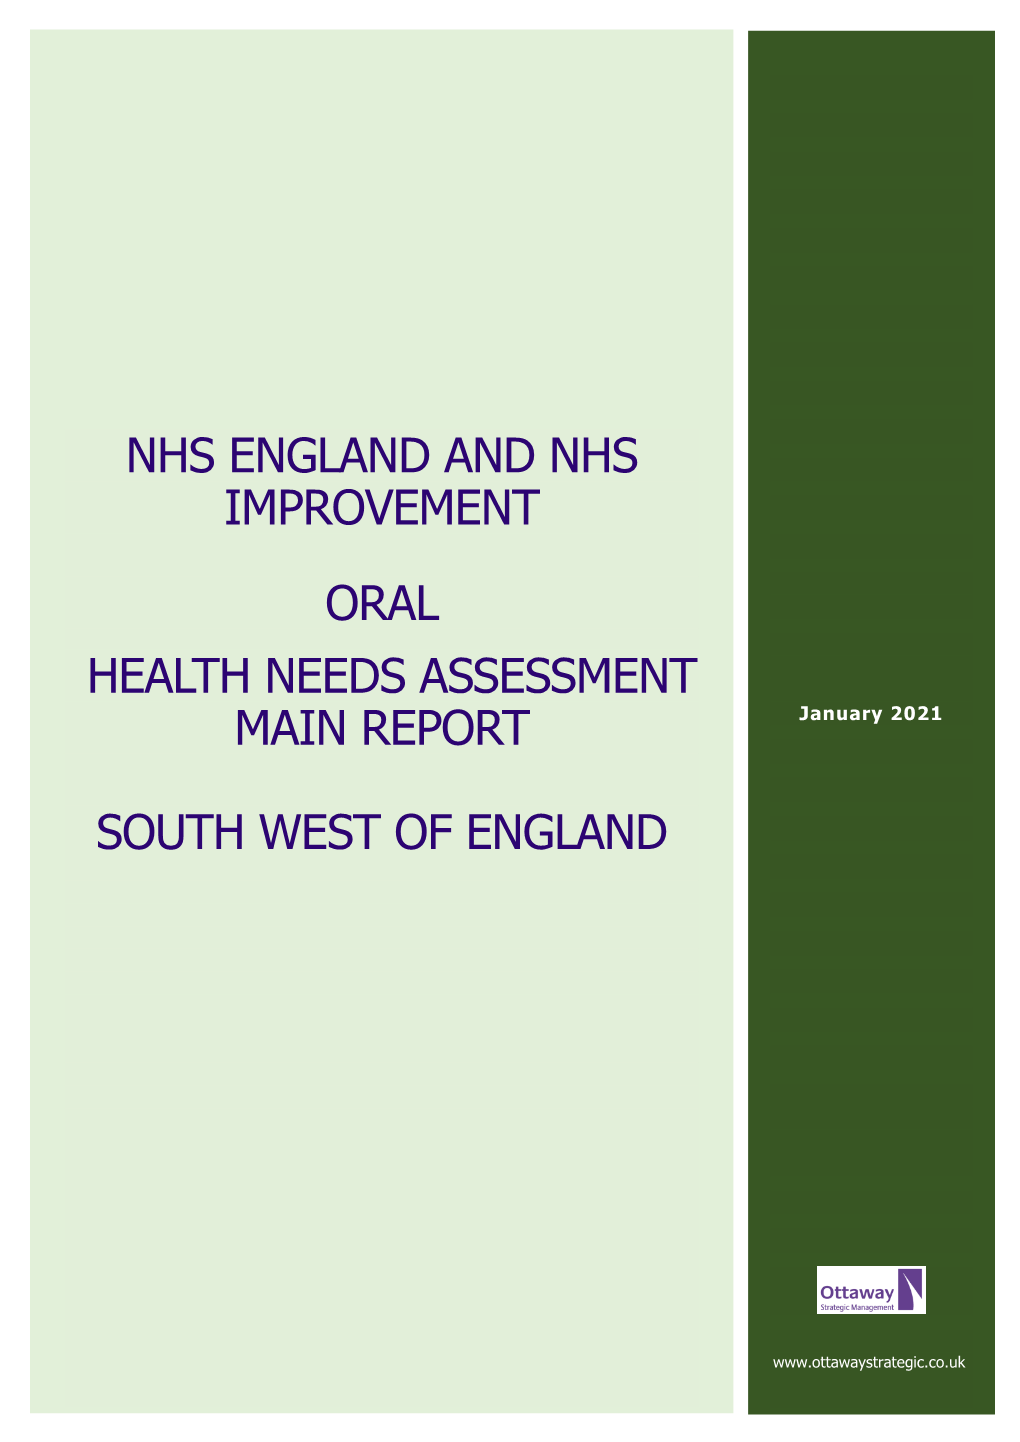 Nhs England and Nhs Improvement Oral Health Needs Assessment Main Report South West of England